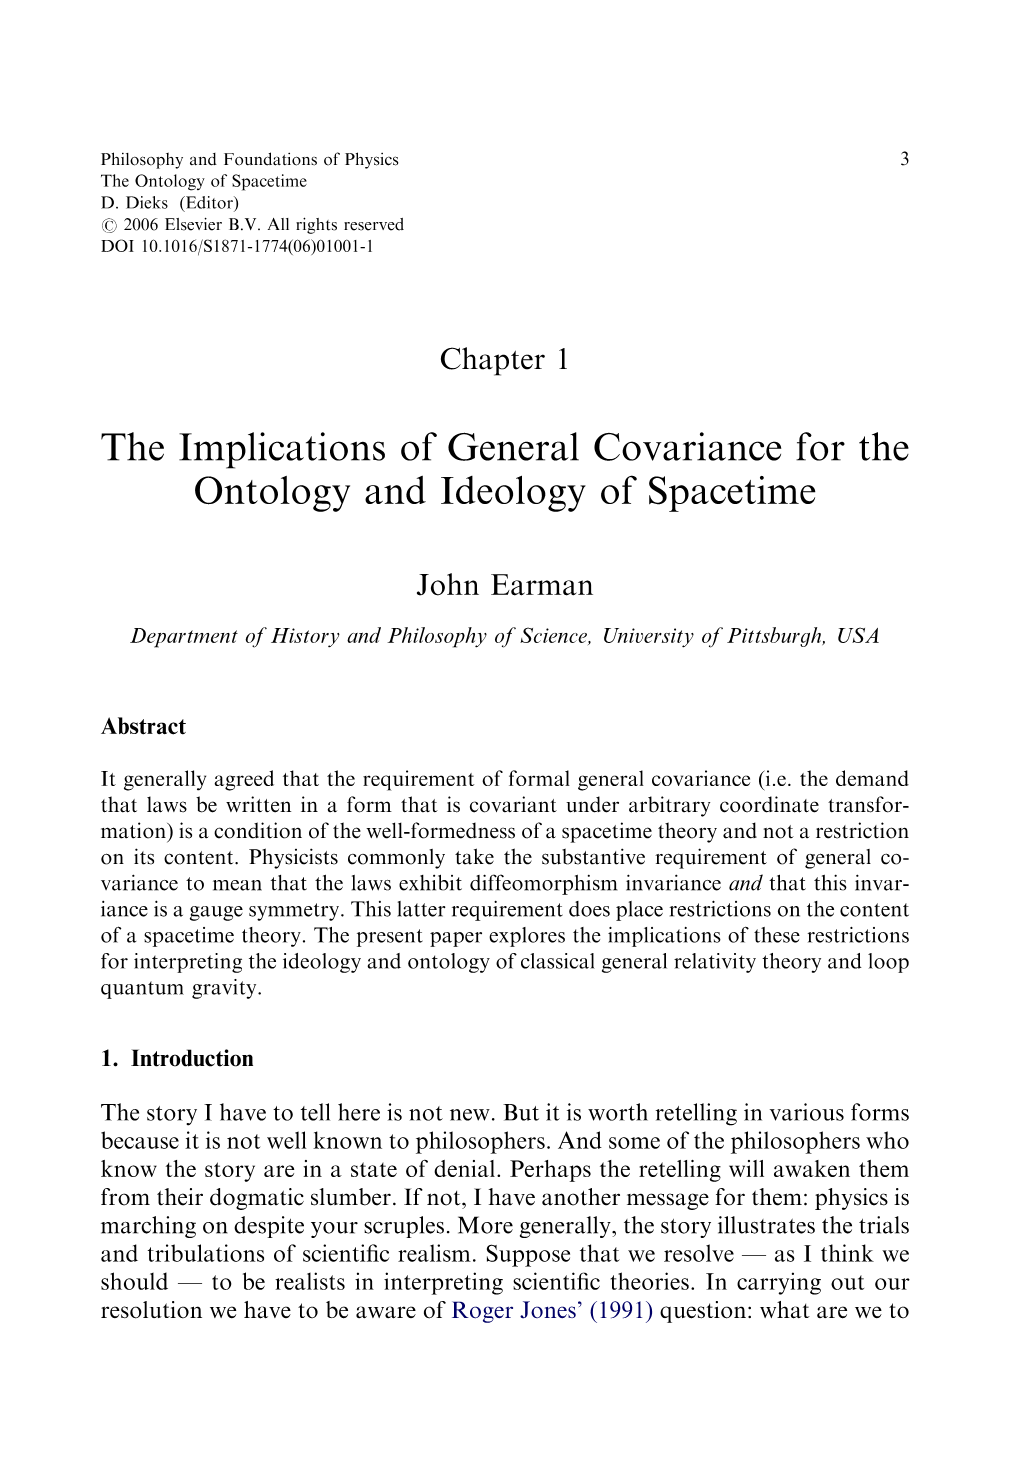 The Implications of General Covariance for the Ontology and Ideology of Spacetime